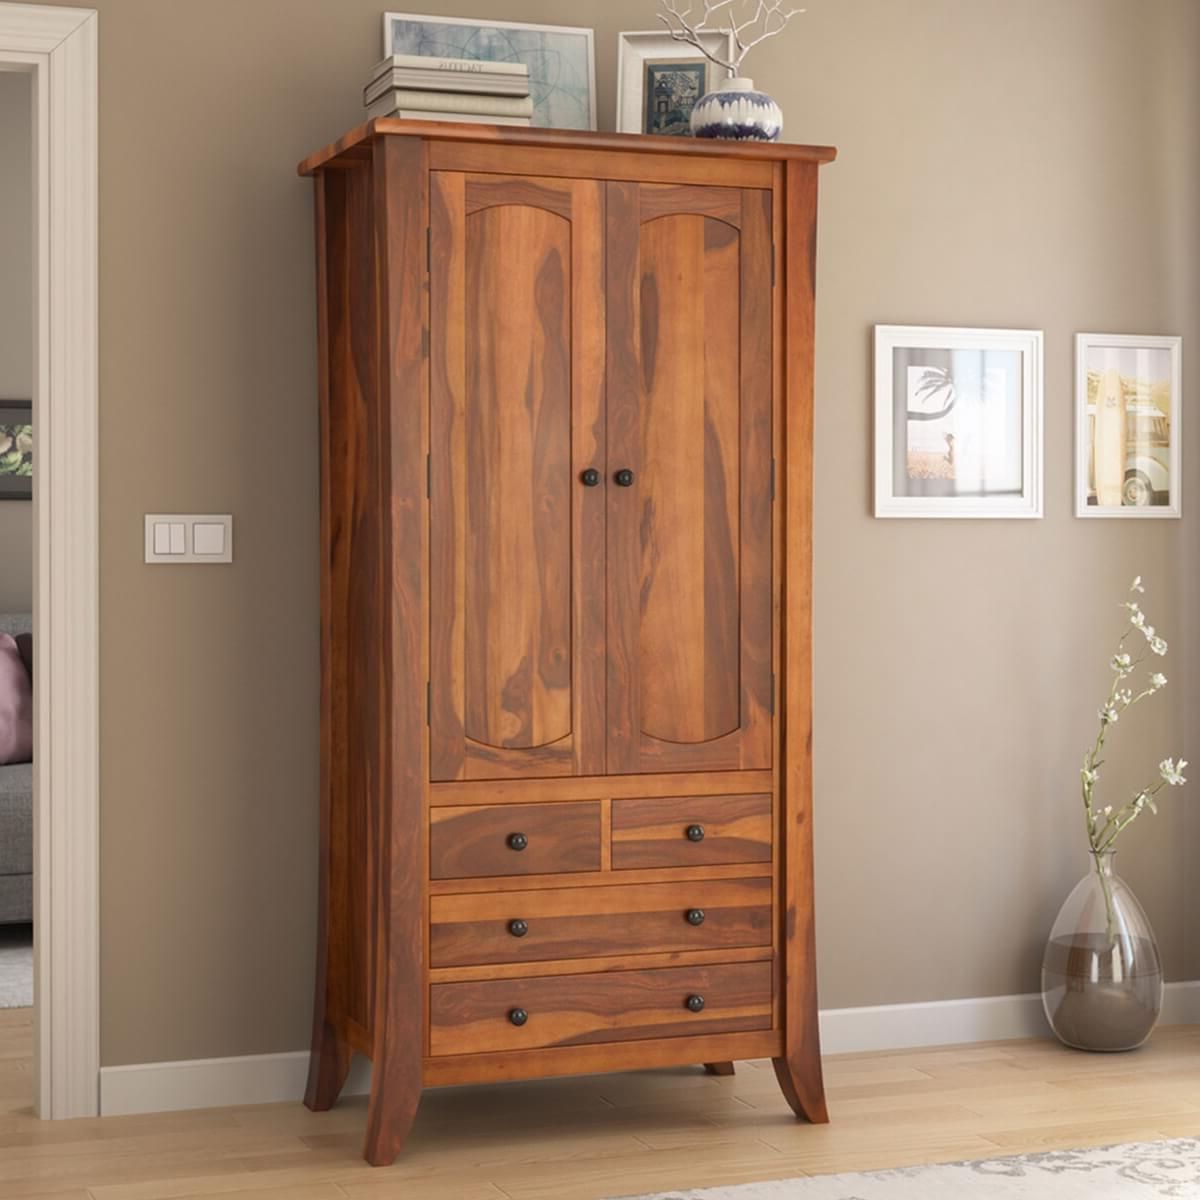 Georgia Rustic Solid Wood Wardrobe Armoire Closet With 4 Drawers Within Cheap Solid Wood Wardrobes (View 10 of 20)